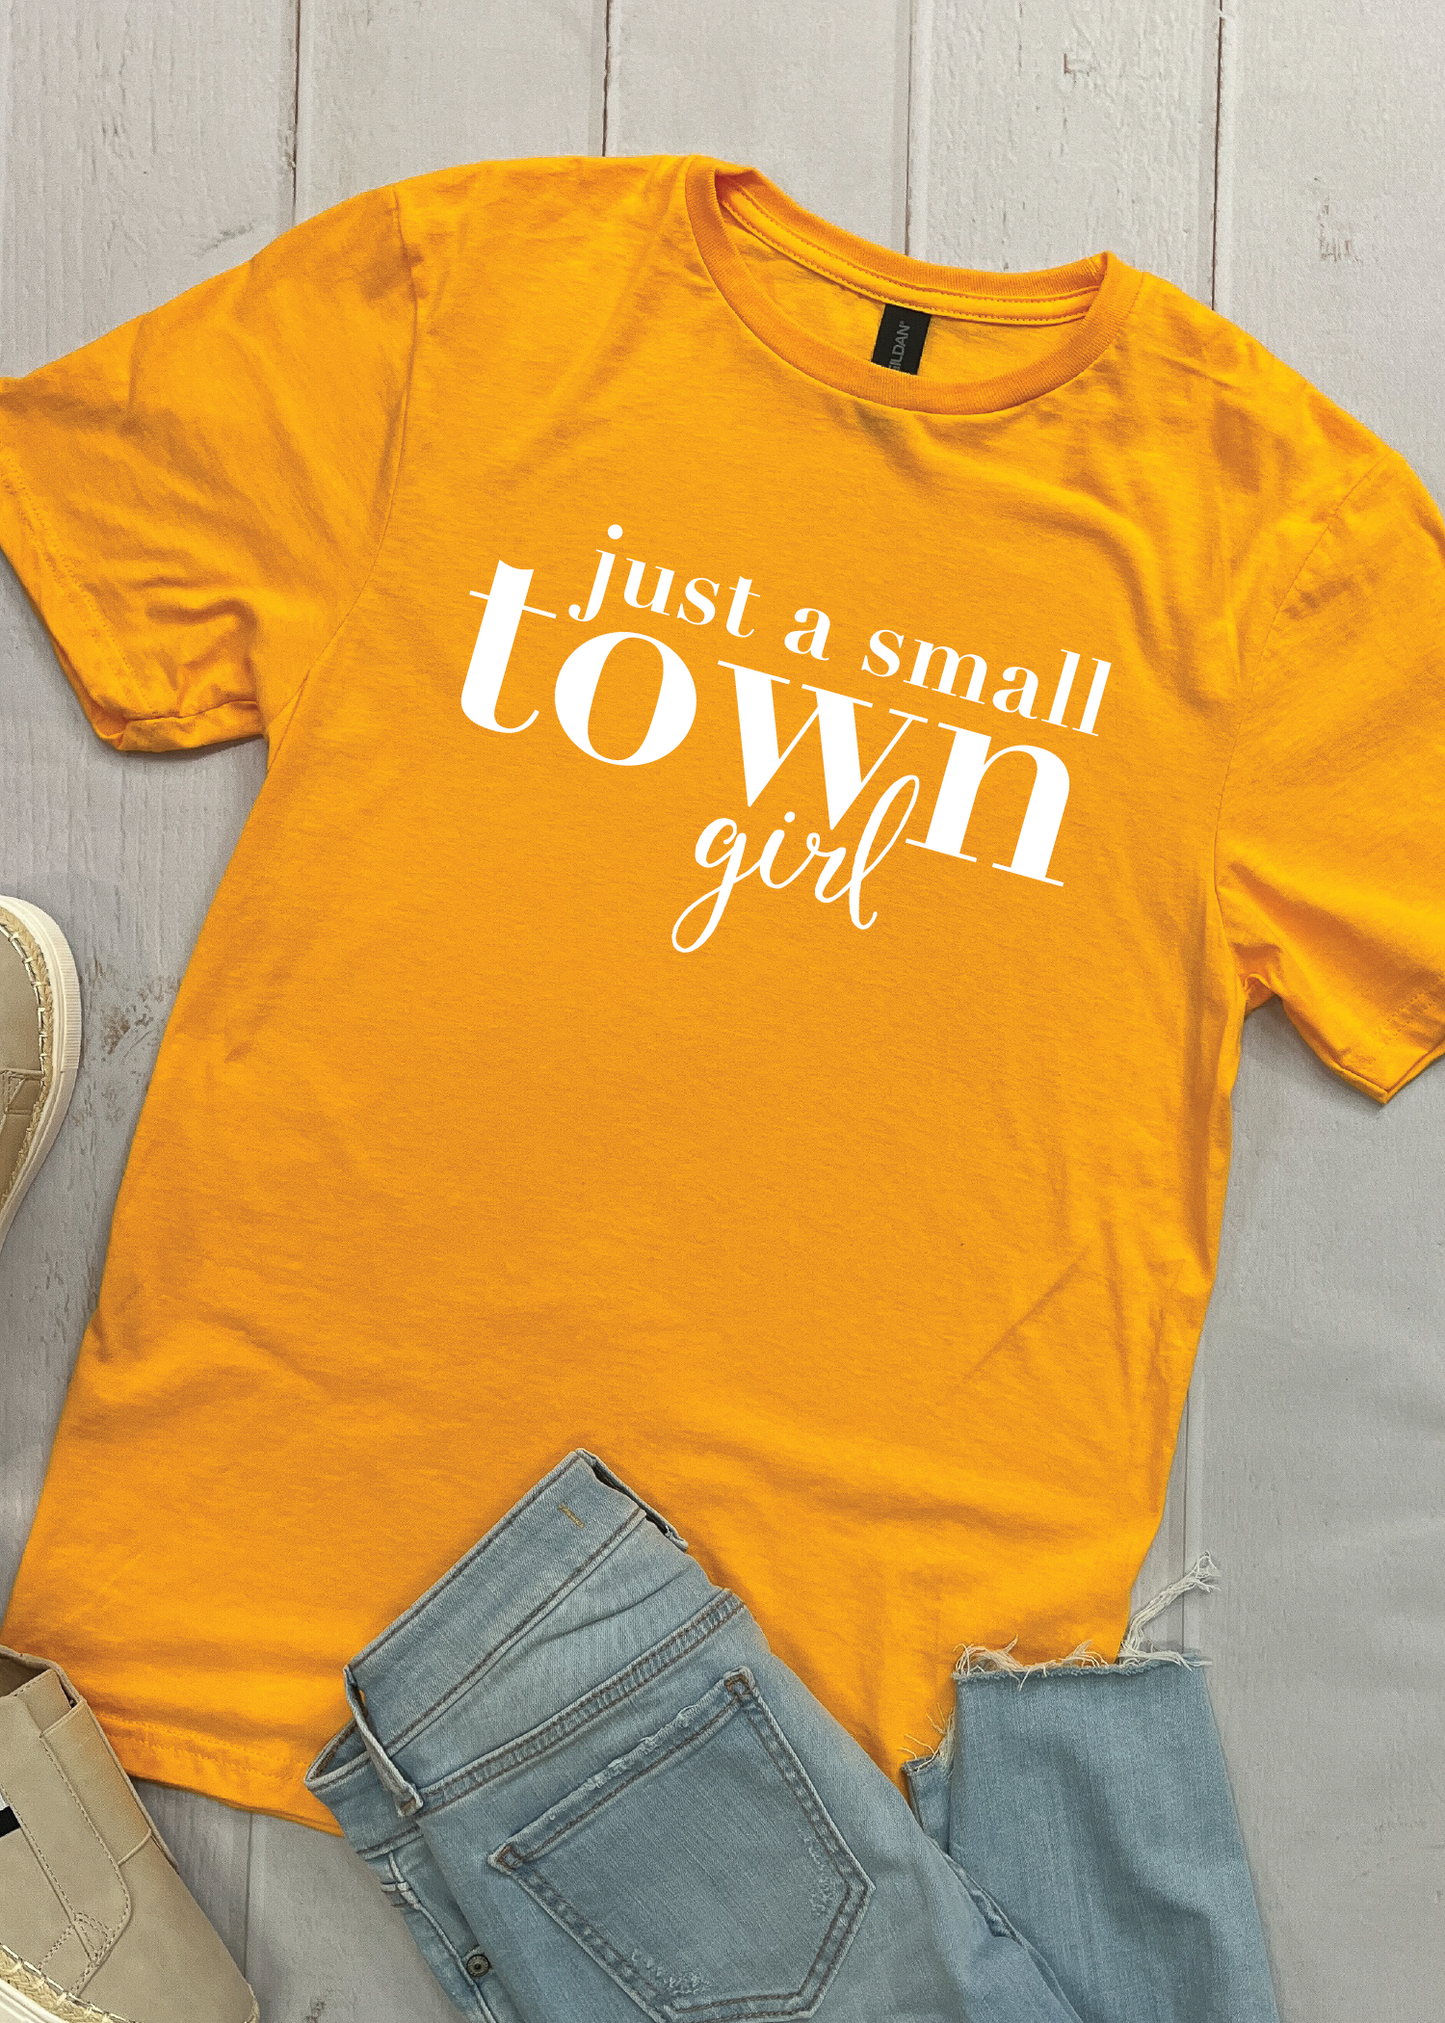 Small Town Girl - Graphic Tee